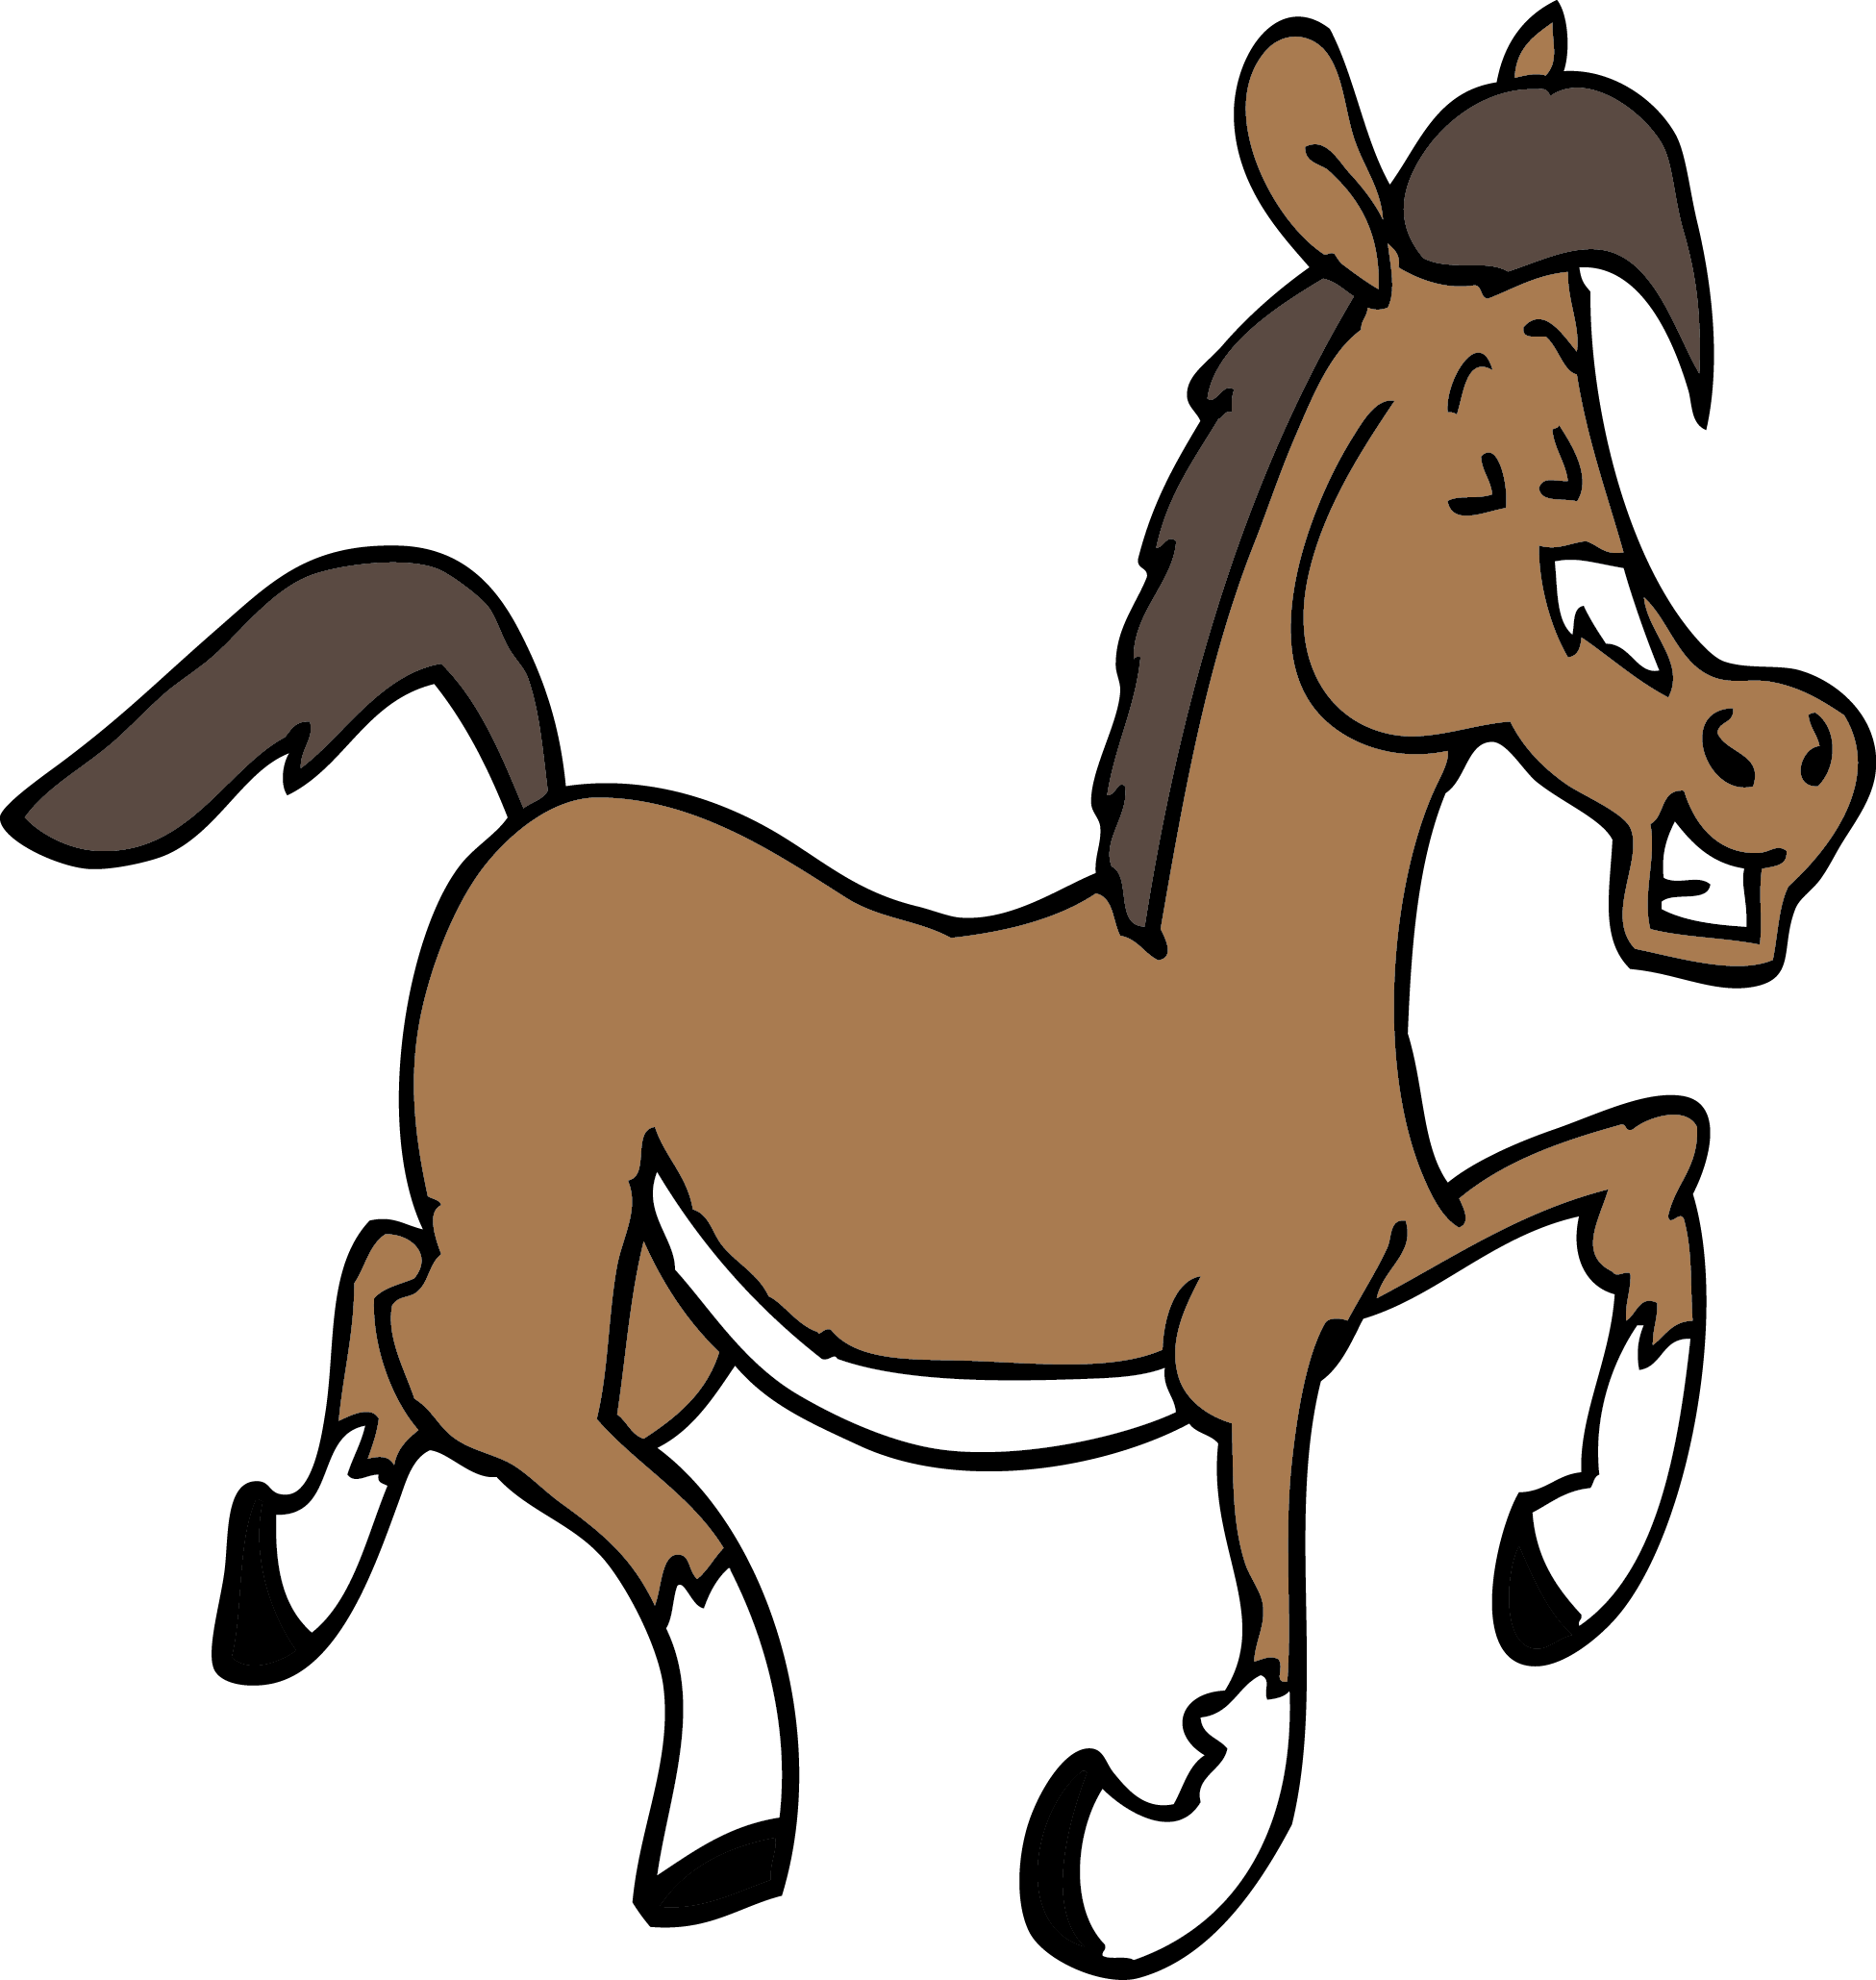 Cartoon Image Of Horse | Free download on ClipArtMag